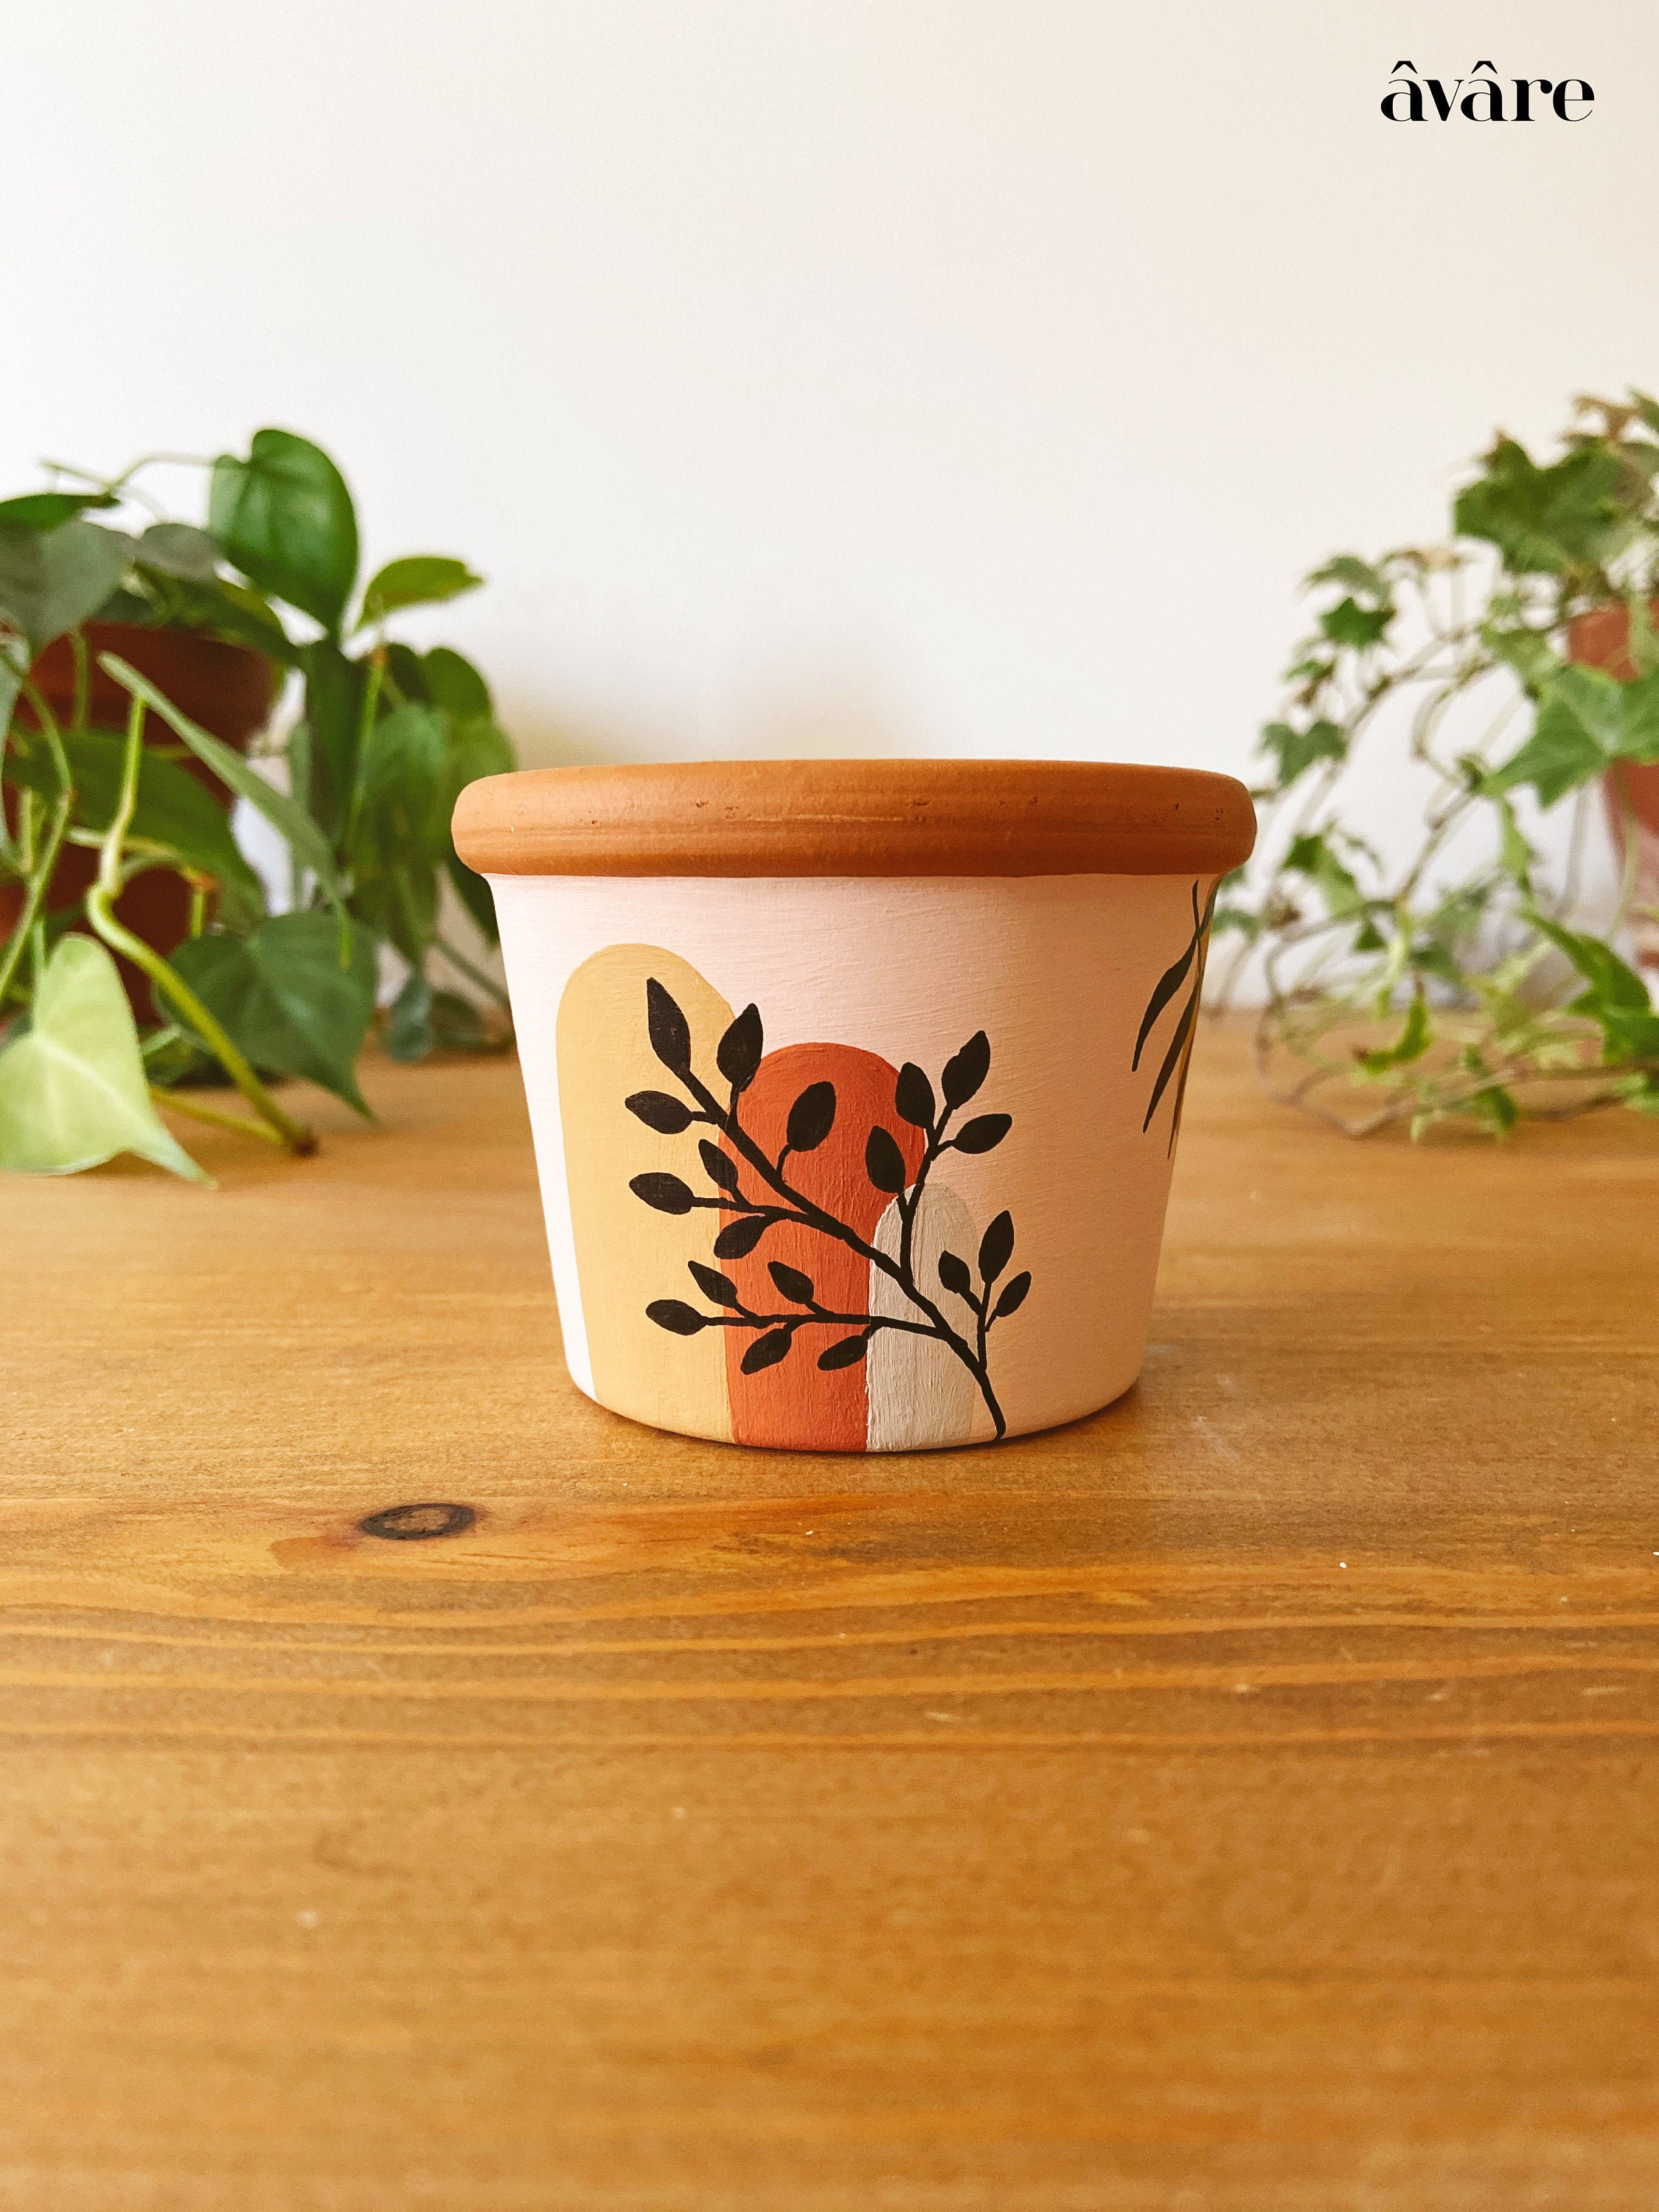 Foreside Home & Garden Natural Handthrown Oval Terracotta Planter with Handpainted Block Pattern